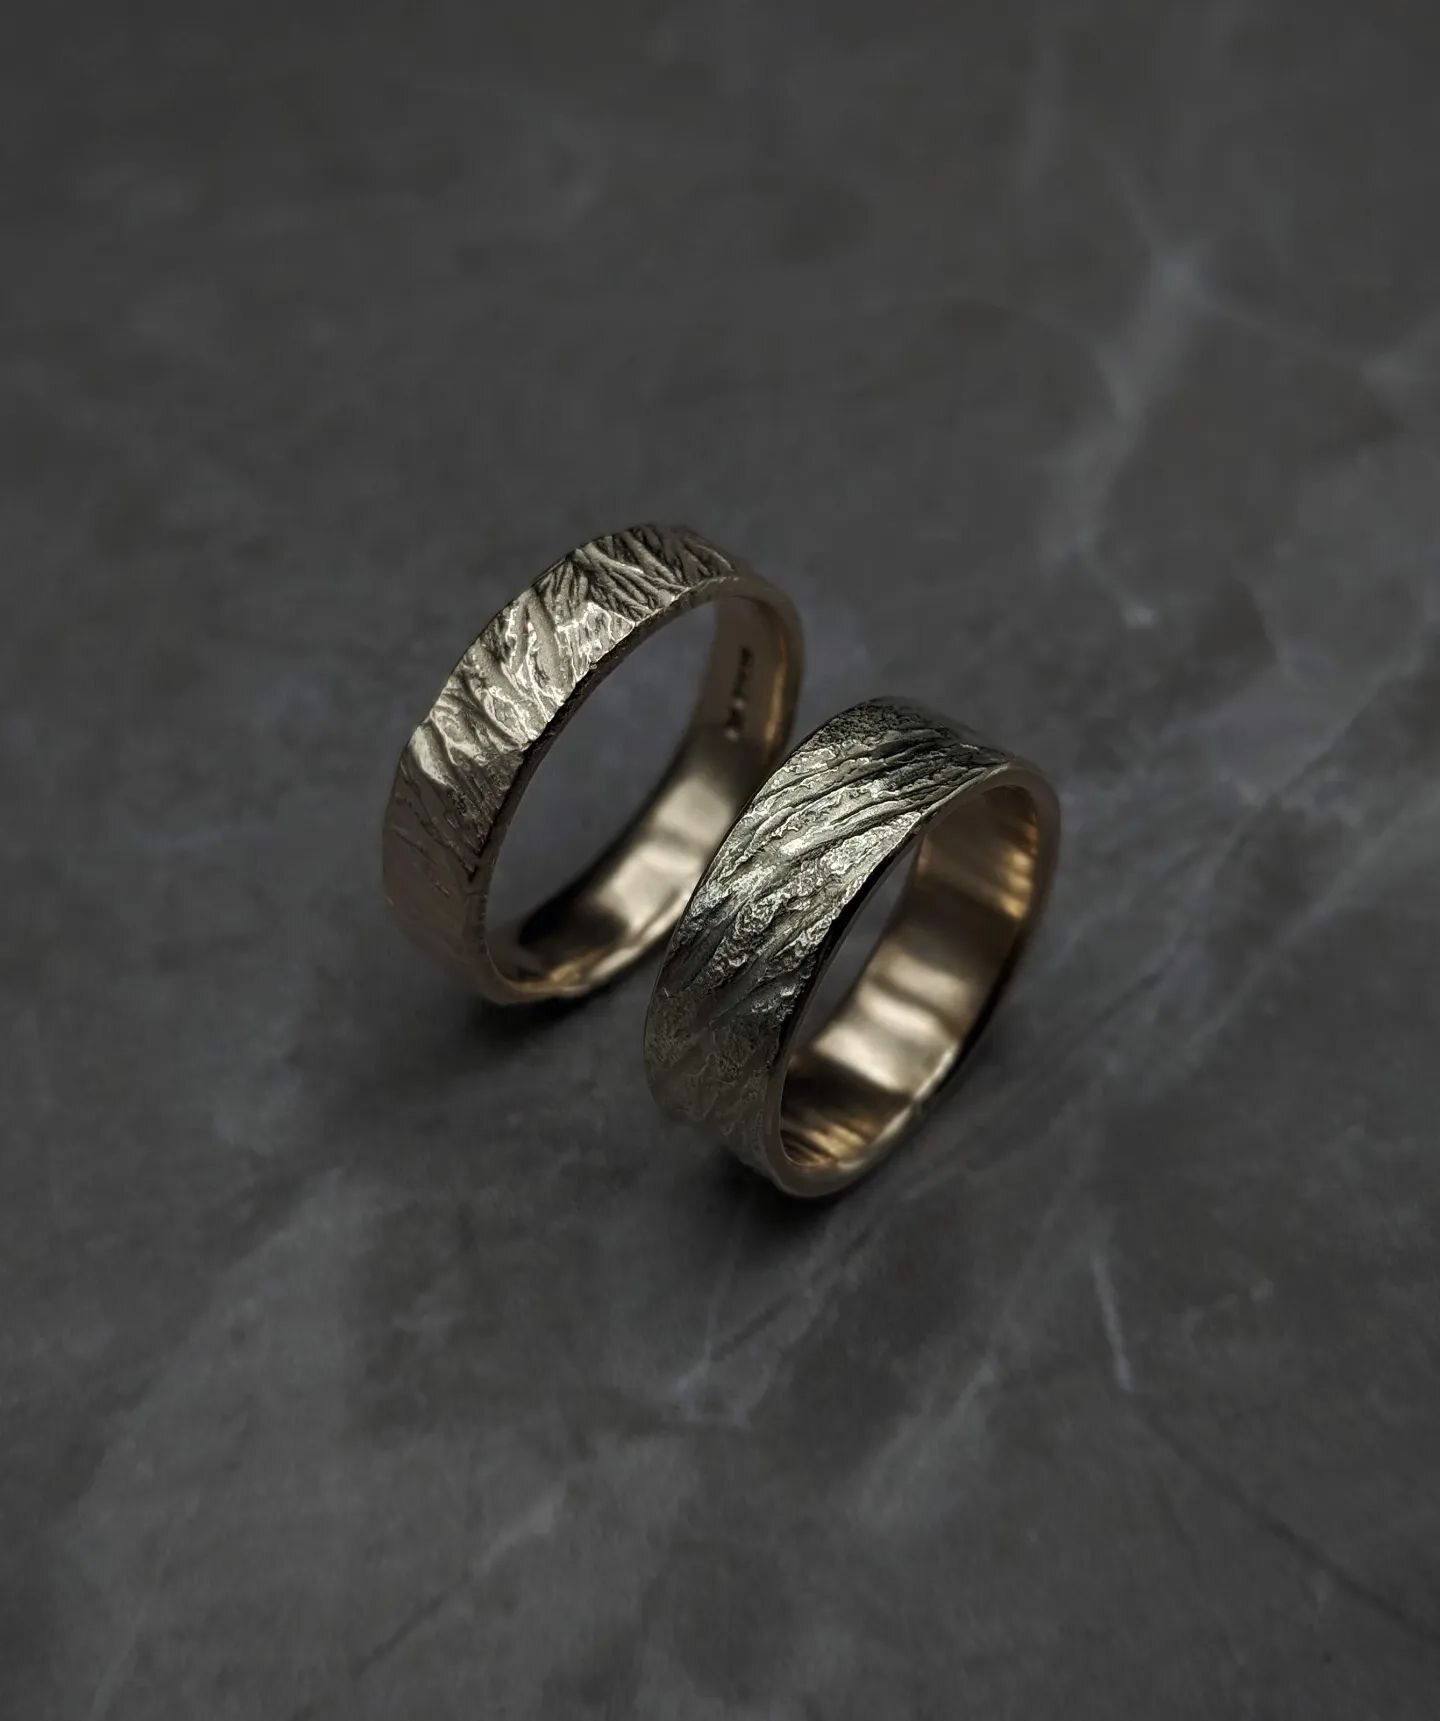 Wedding rings for N and M, collected this weekend. We discussed how I could incorporate details of a special place in the design so I picked out sections of photos they sent me to create textured samples in silver.

So here's the final rings in 9ct y